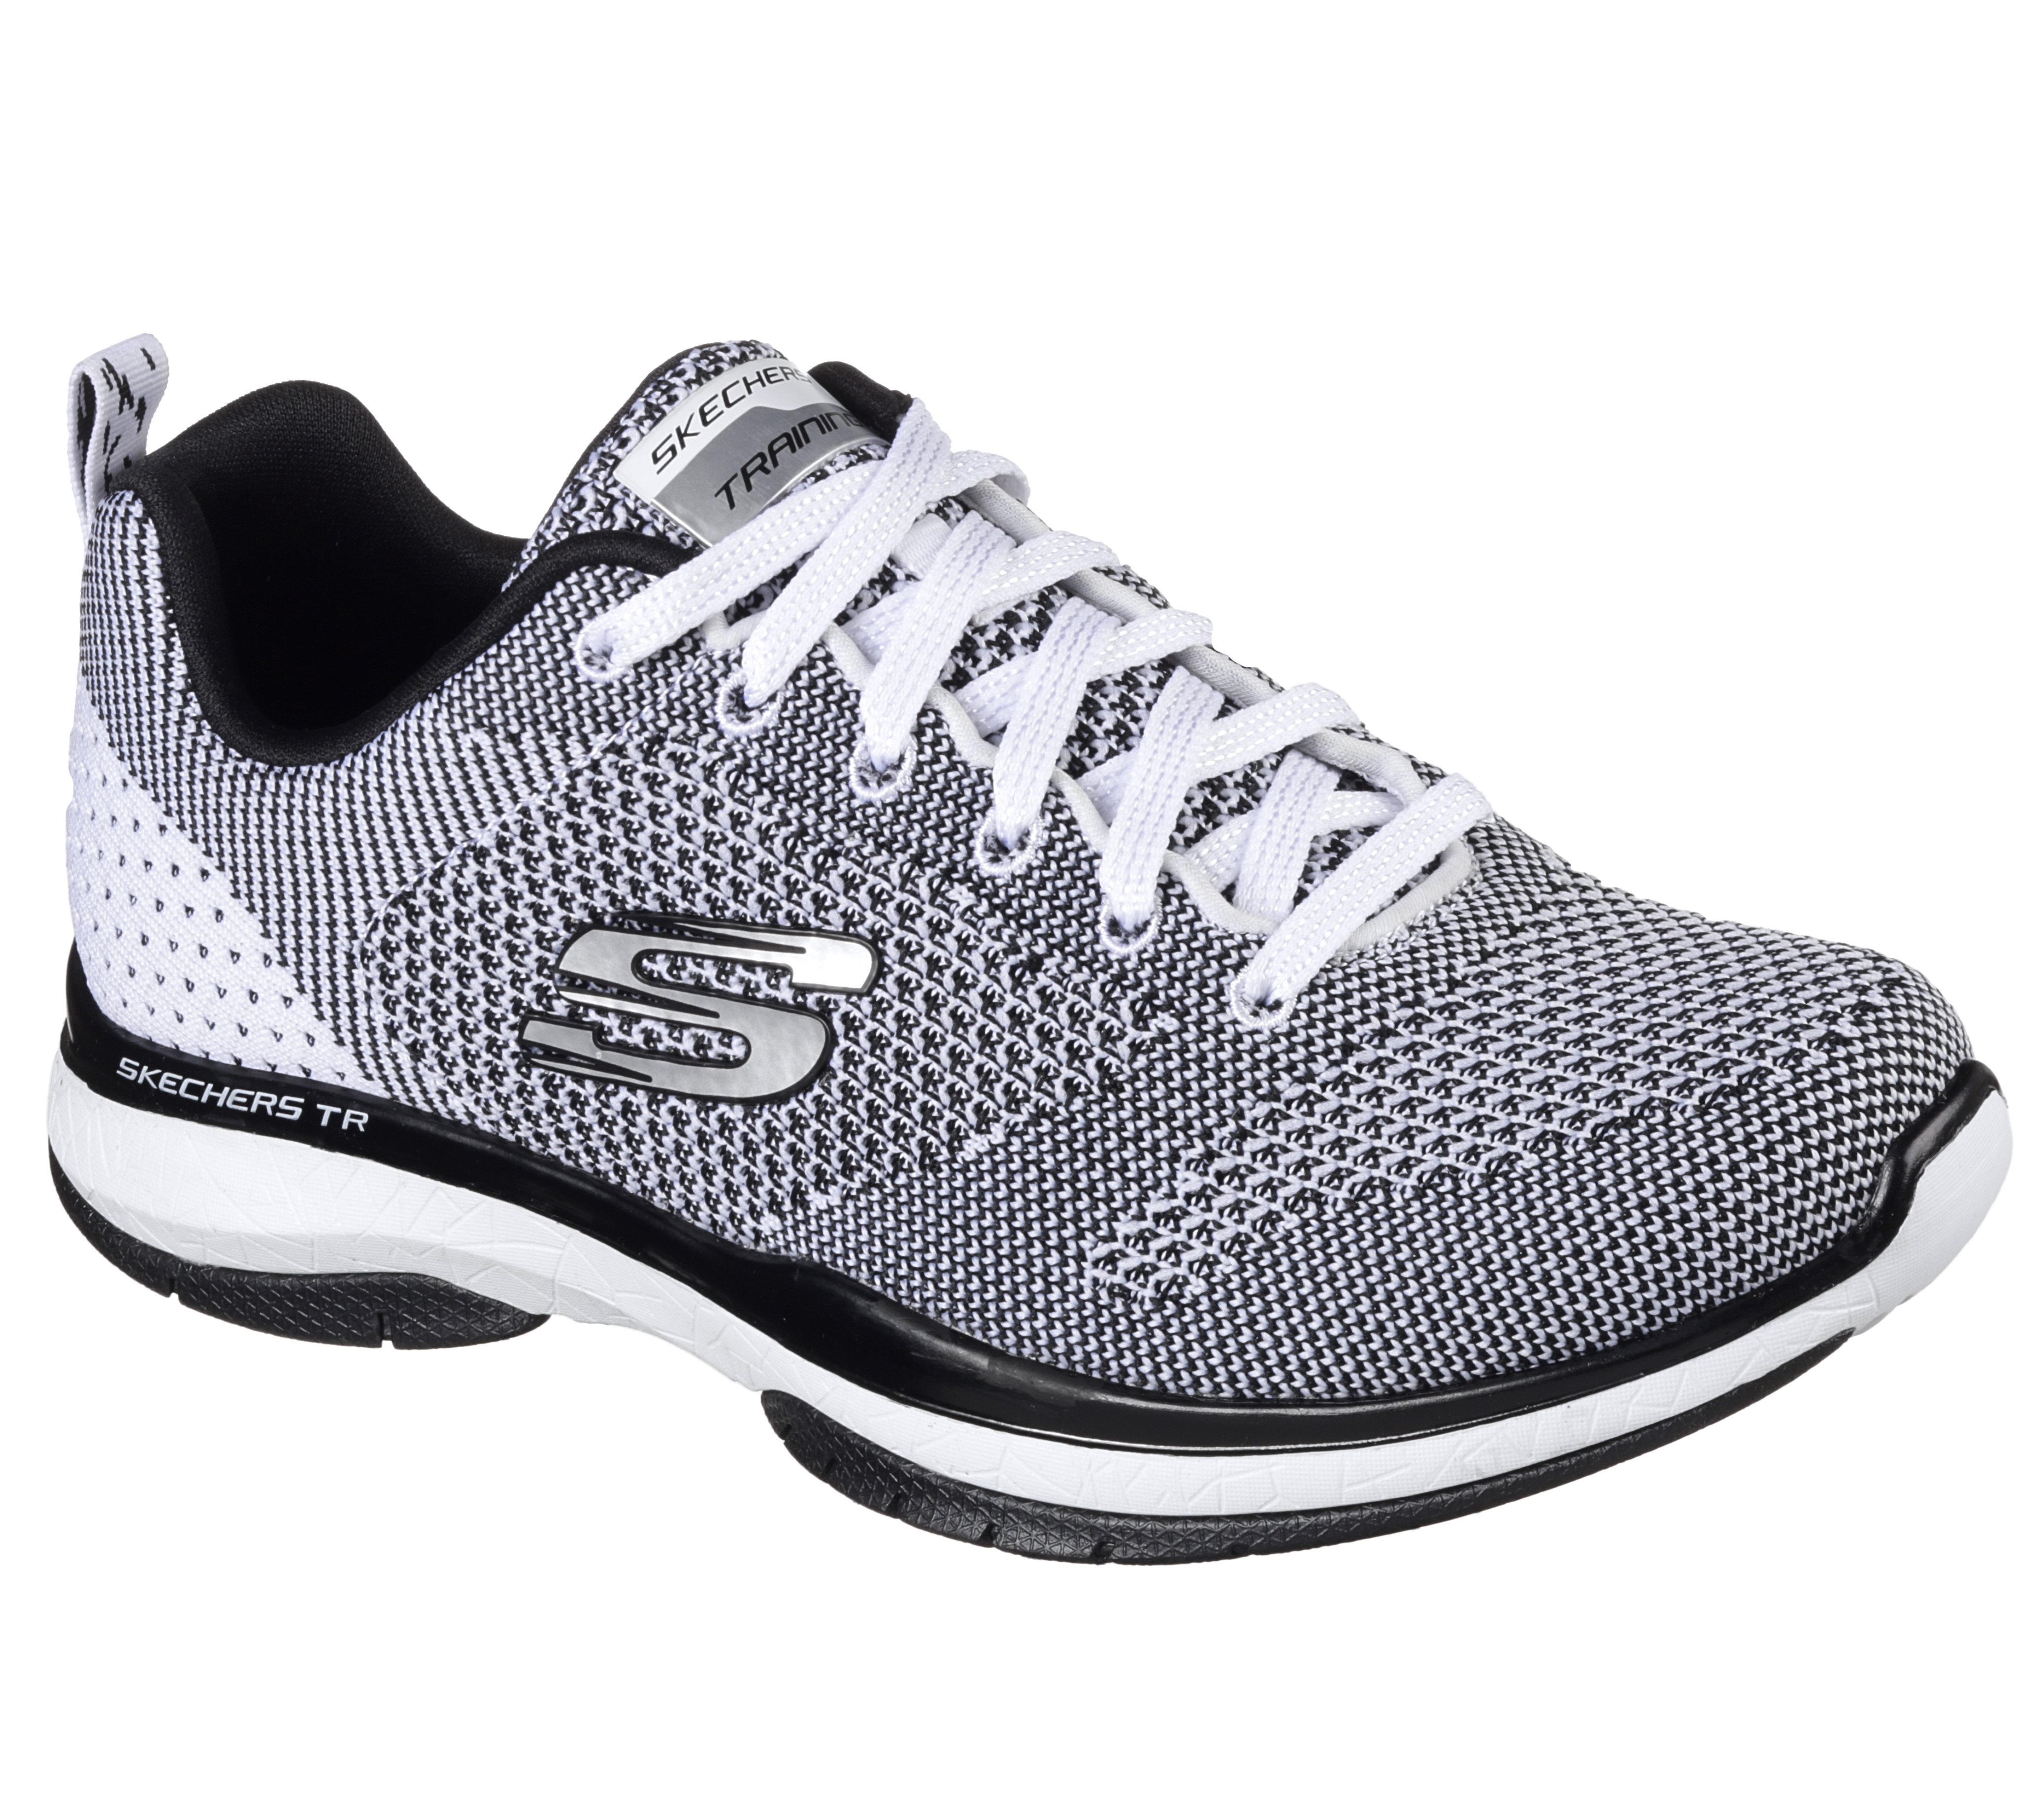 12667 BURST TR CLOSE KNIT SKECHERS - WOMENS SHOES-SCUFFS & SLIDES : Shirley's Shoes - SS17 SKECHERS